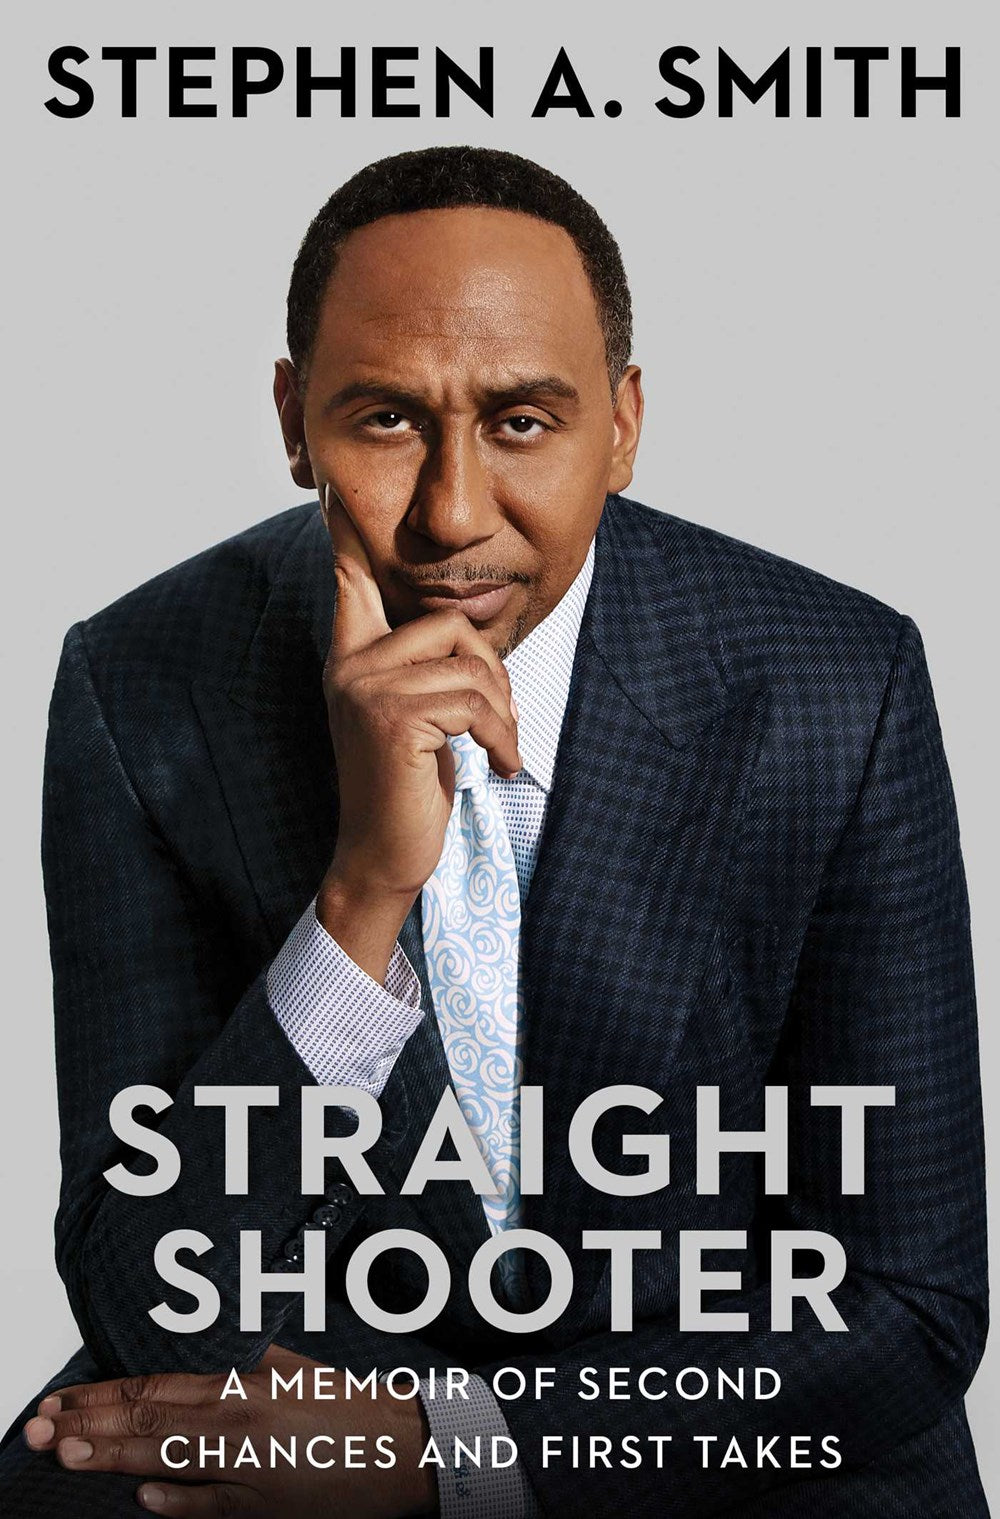 Straight Shooter: A Memoir of Second Chances and First Takes by Stephen A. Smith